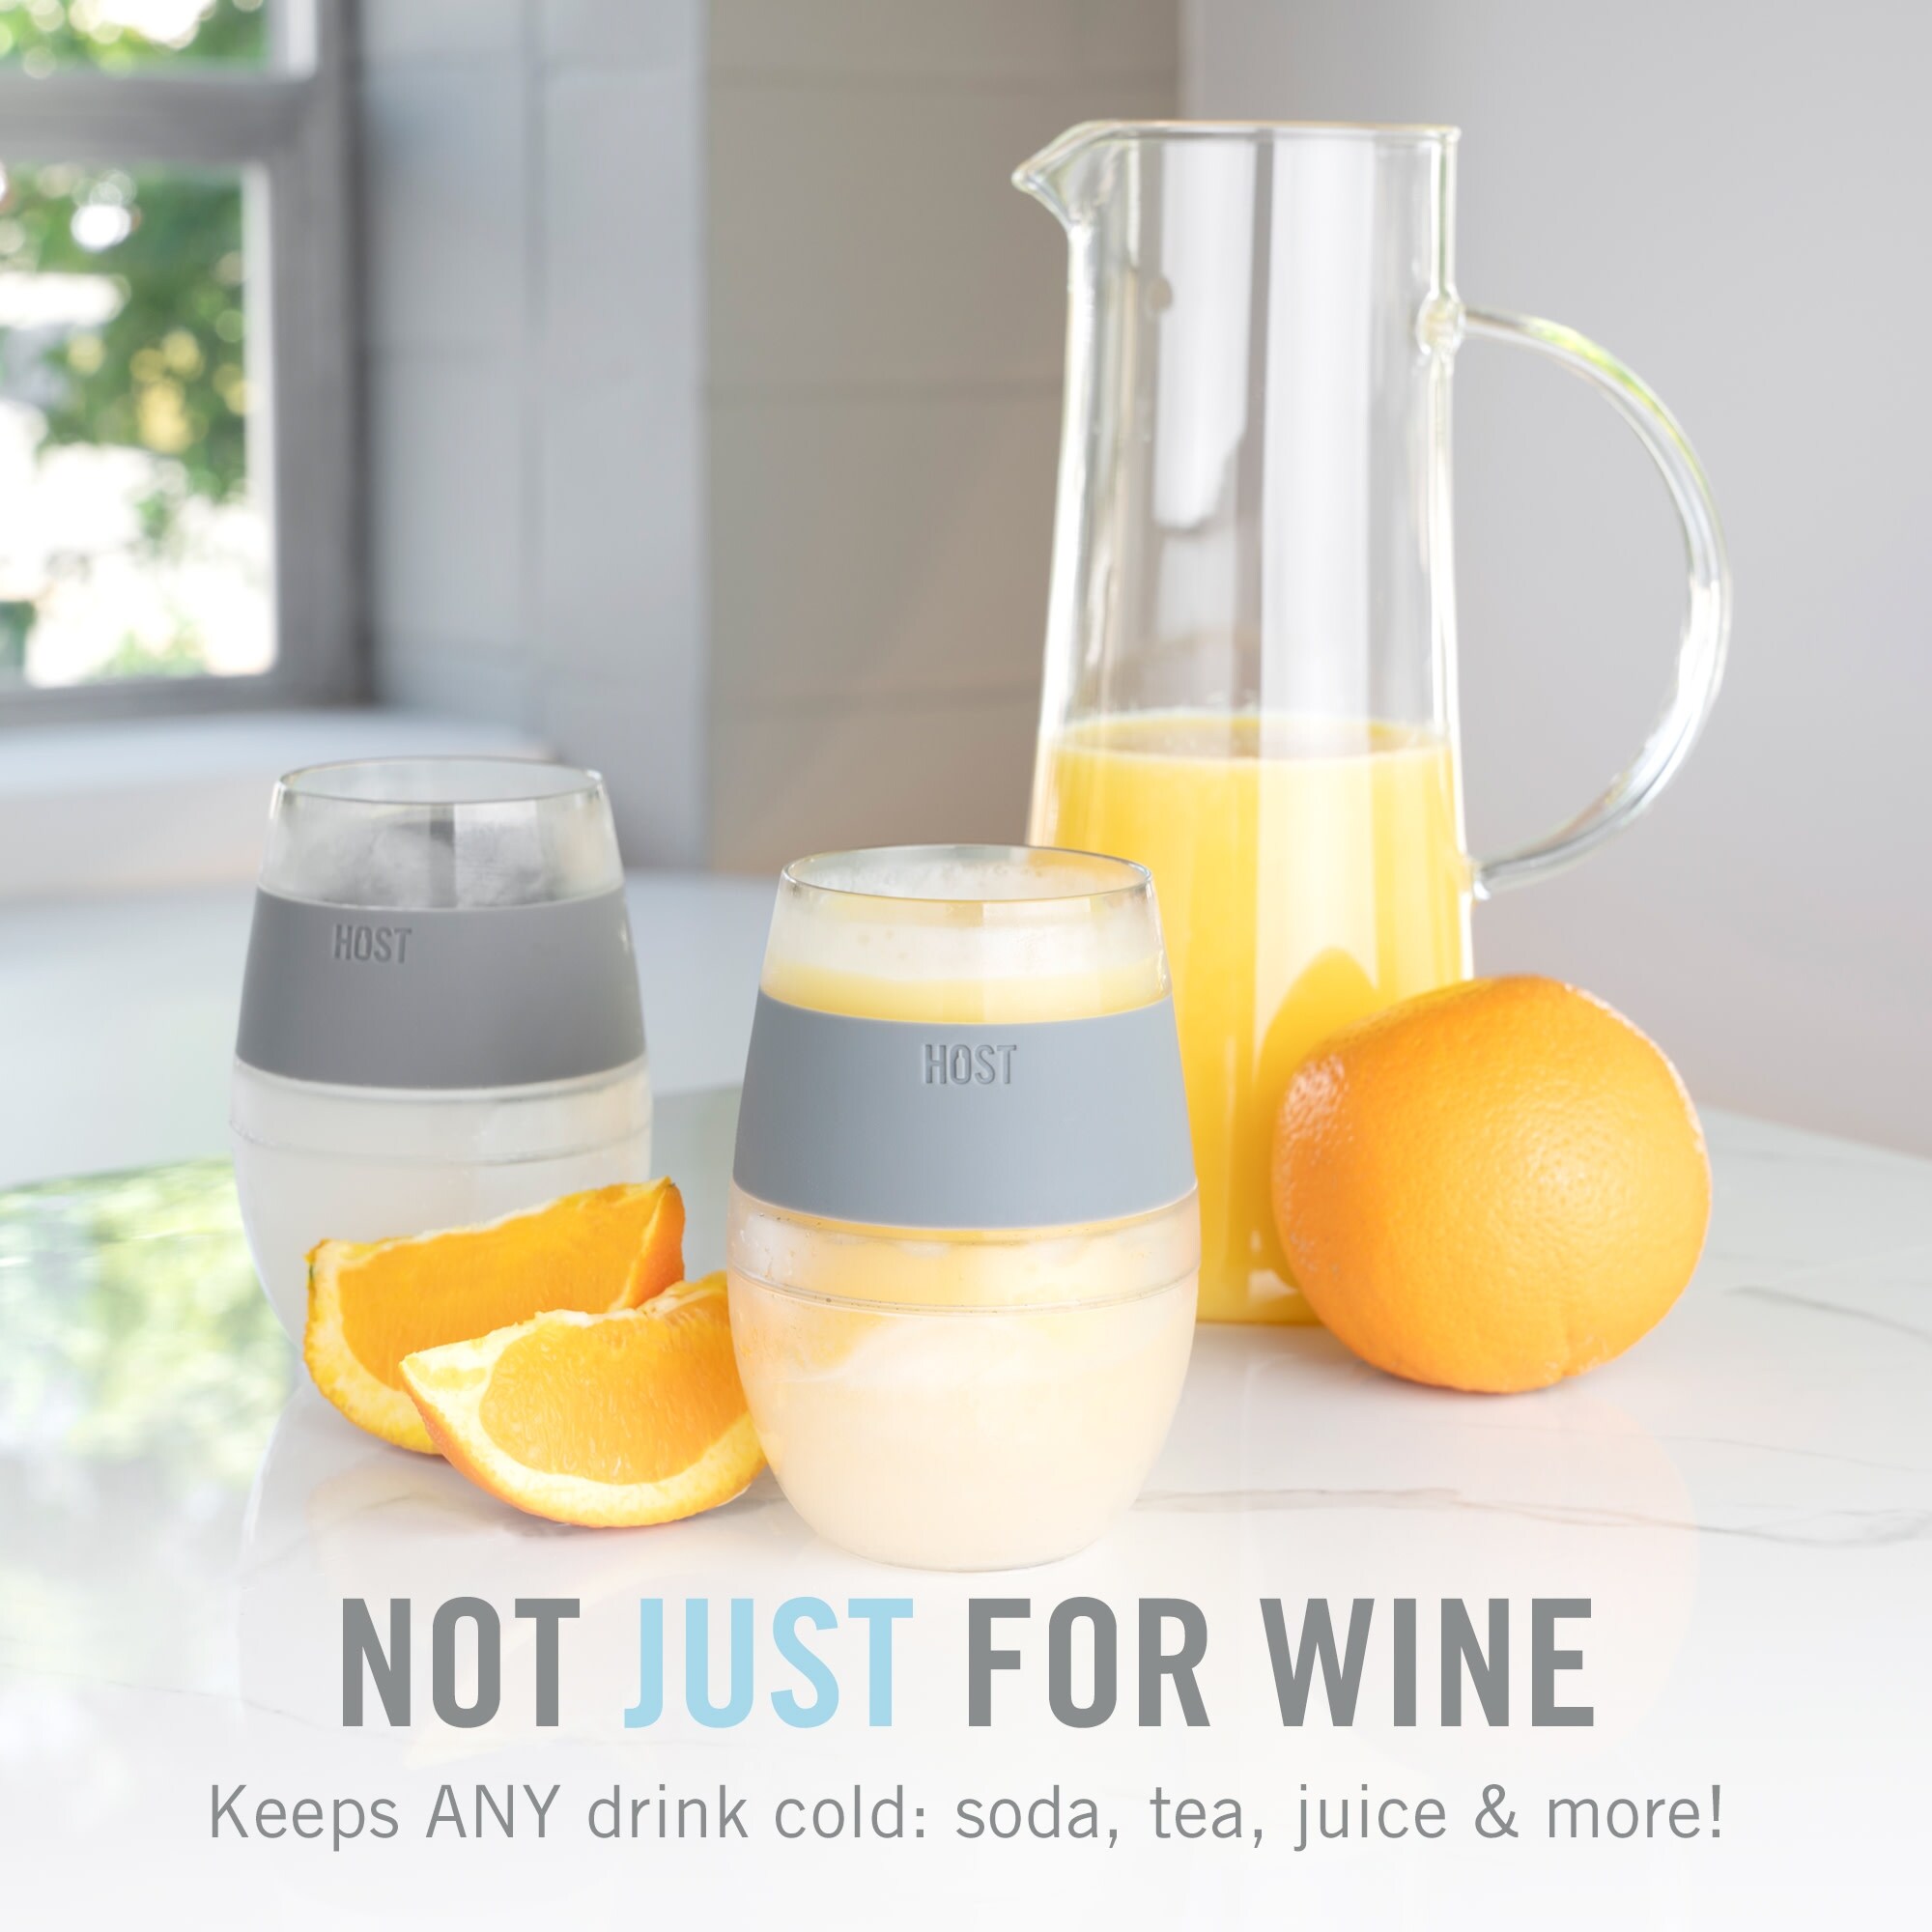 https://ak1.ostkcdn.com/images/products/is/images/direct/5ad9e77f0052d5d60169b4672678963411b24eb1/Wine-FREEZE-Cooling-Cup-in-Grey-%281-pack%29-by-HOST.jpg